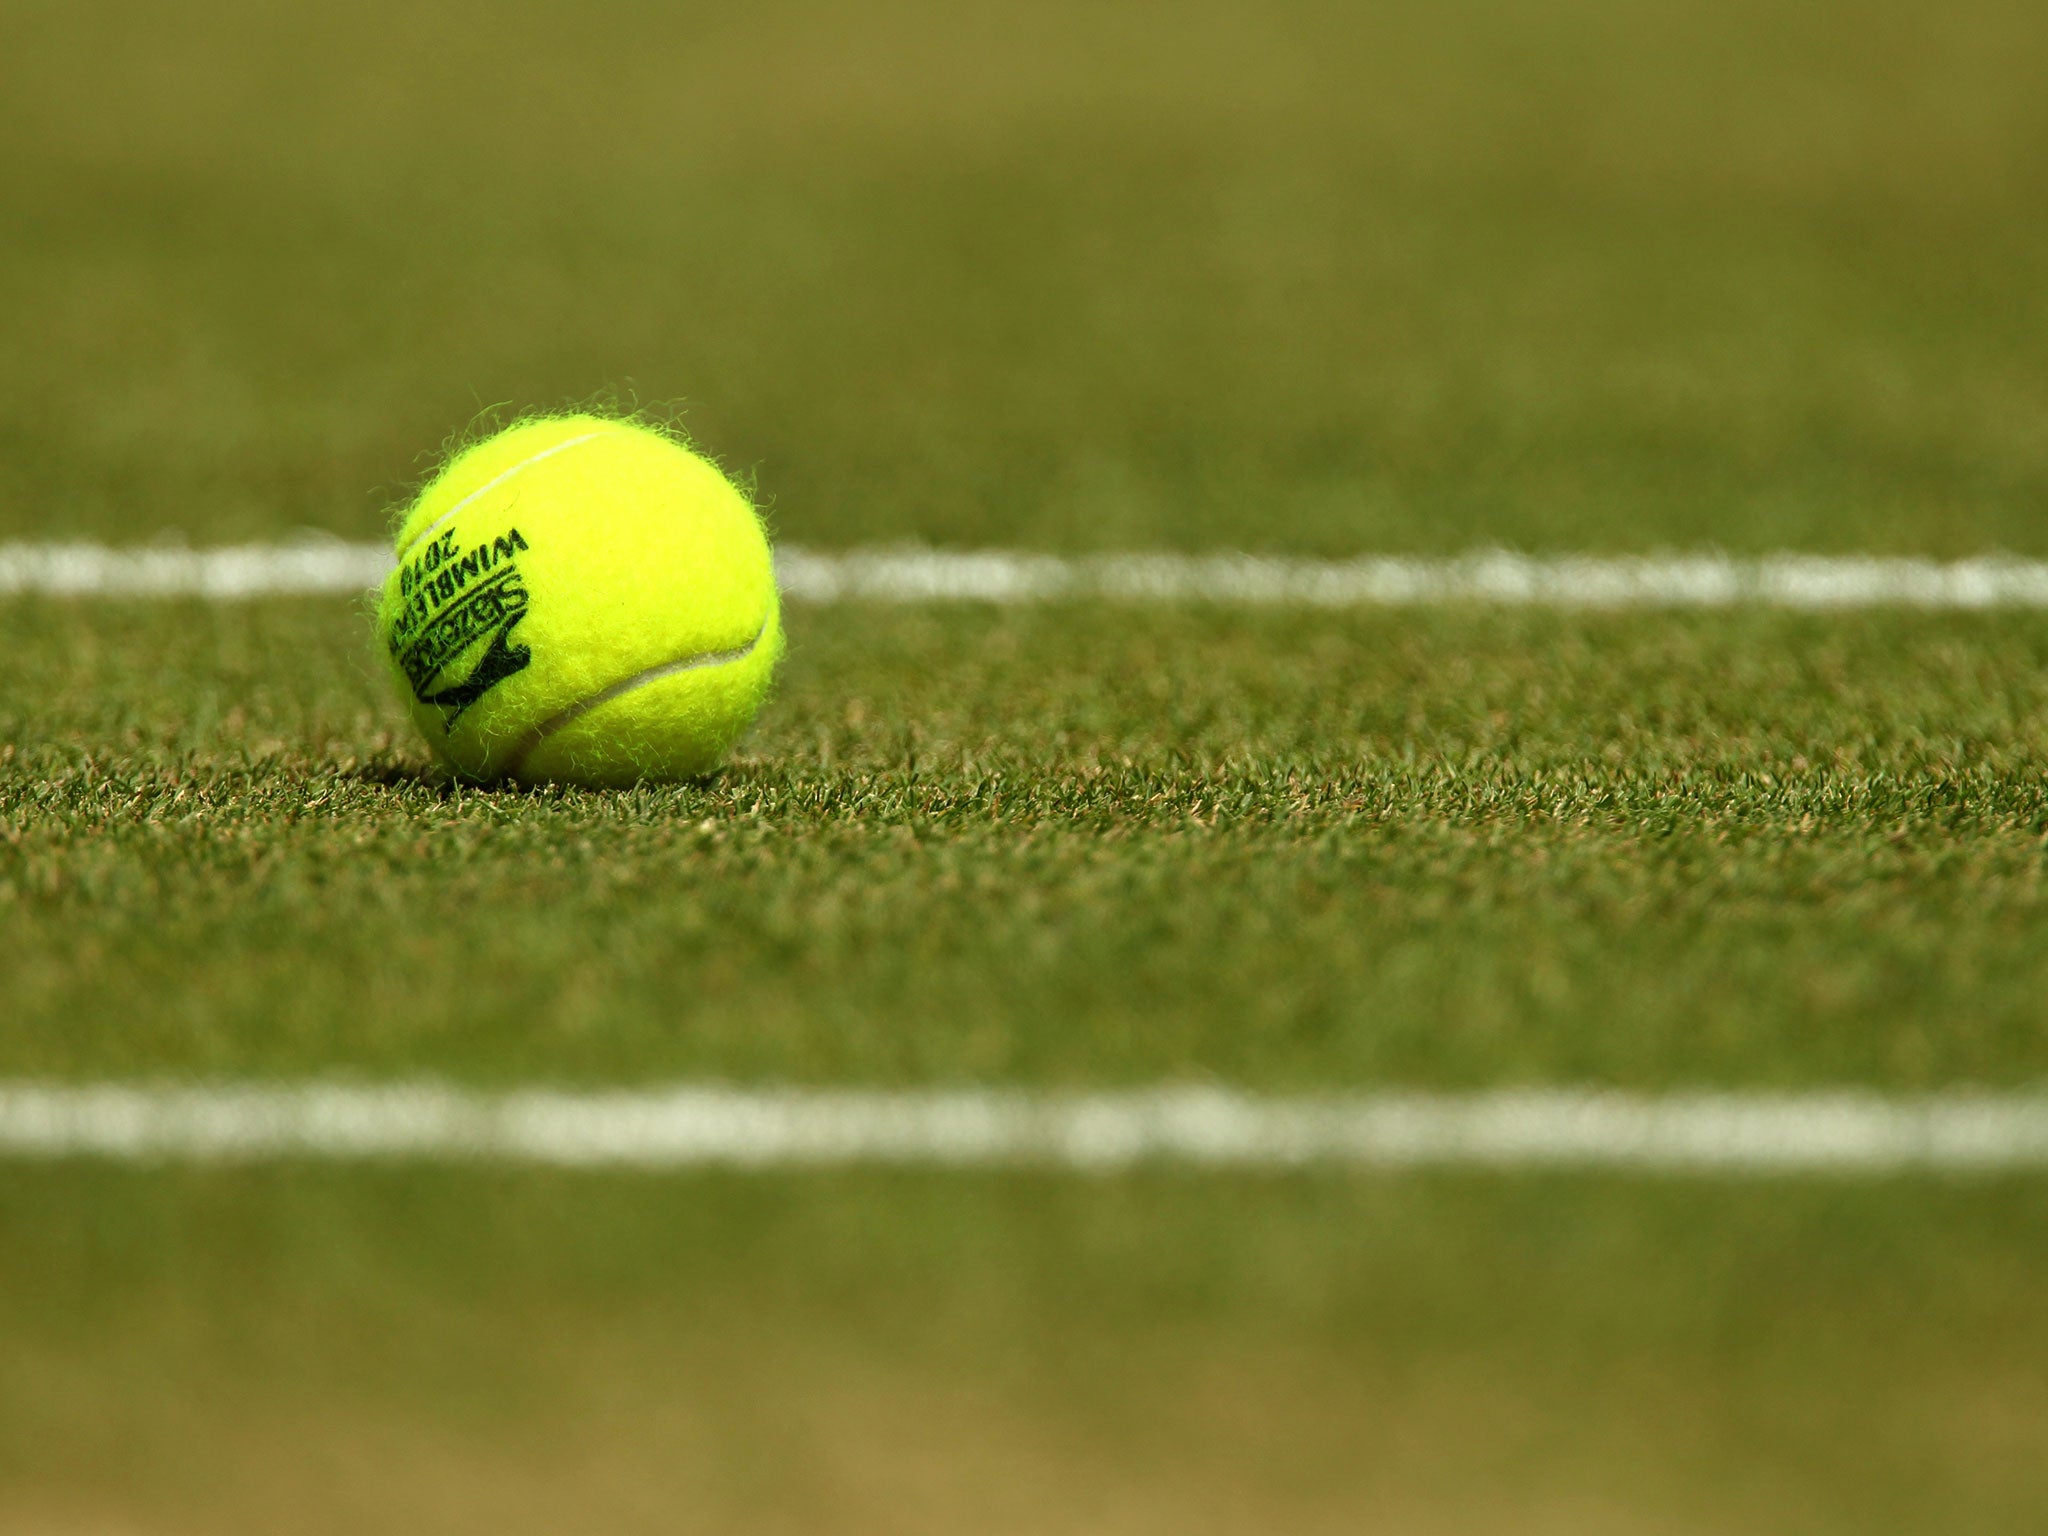 Tennis is facing a match-fixing scandal following a report by the BBC and Buzzfeed